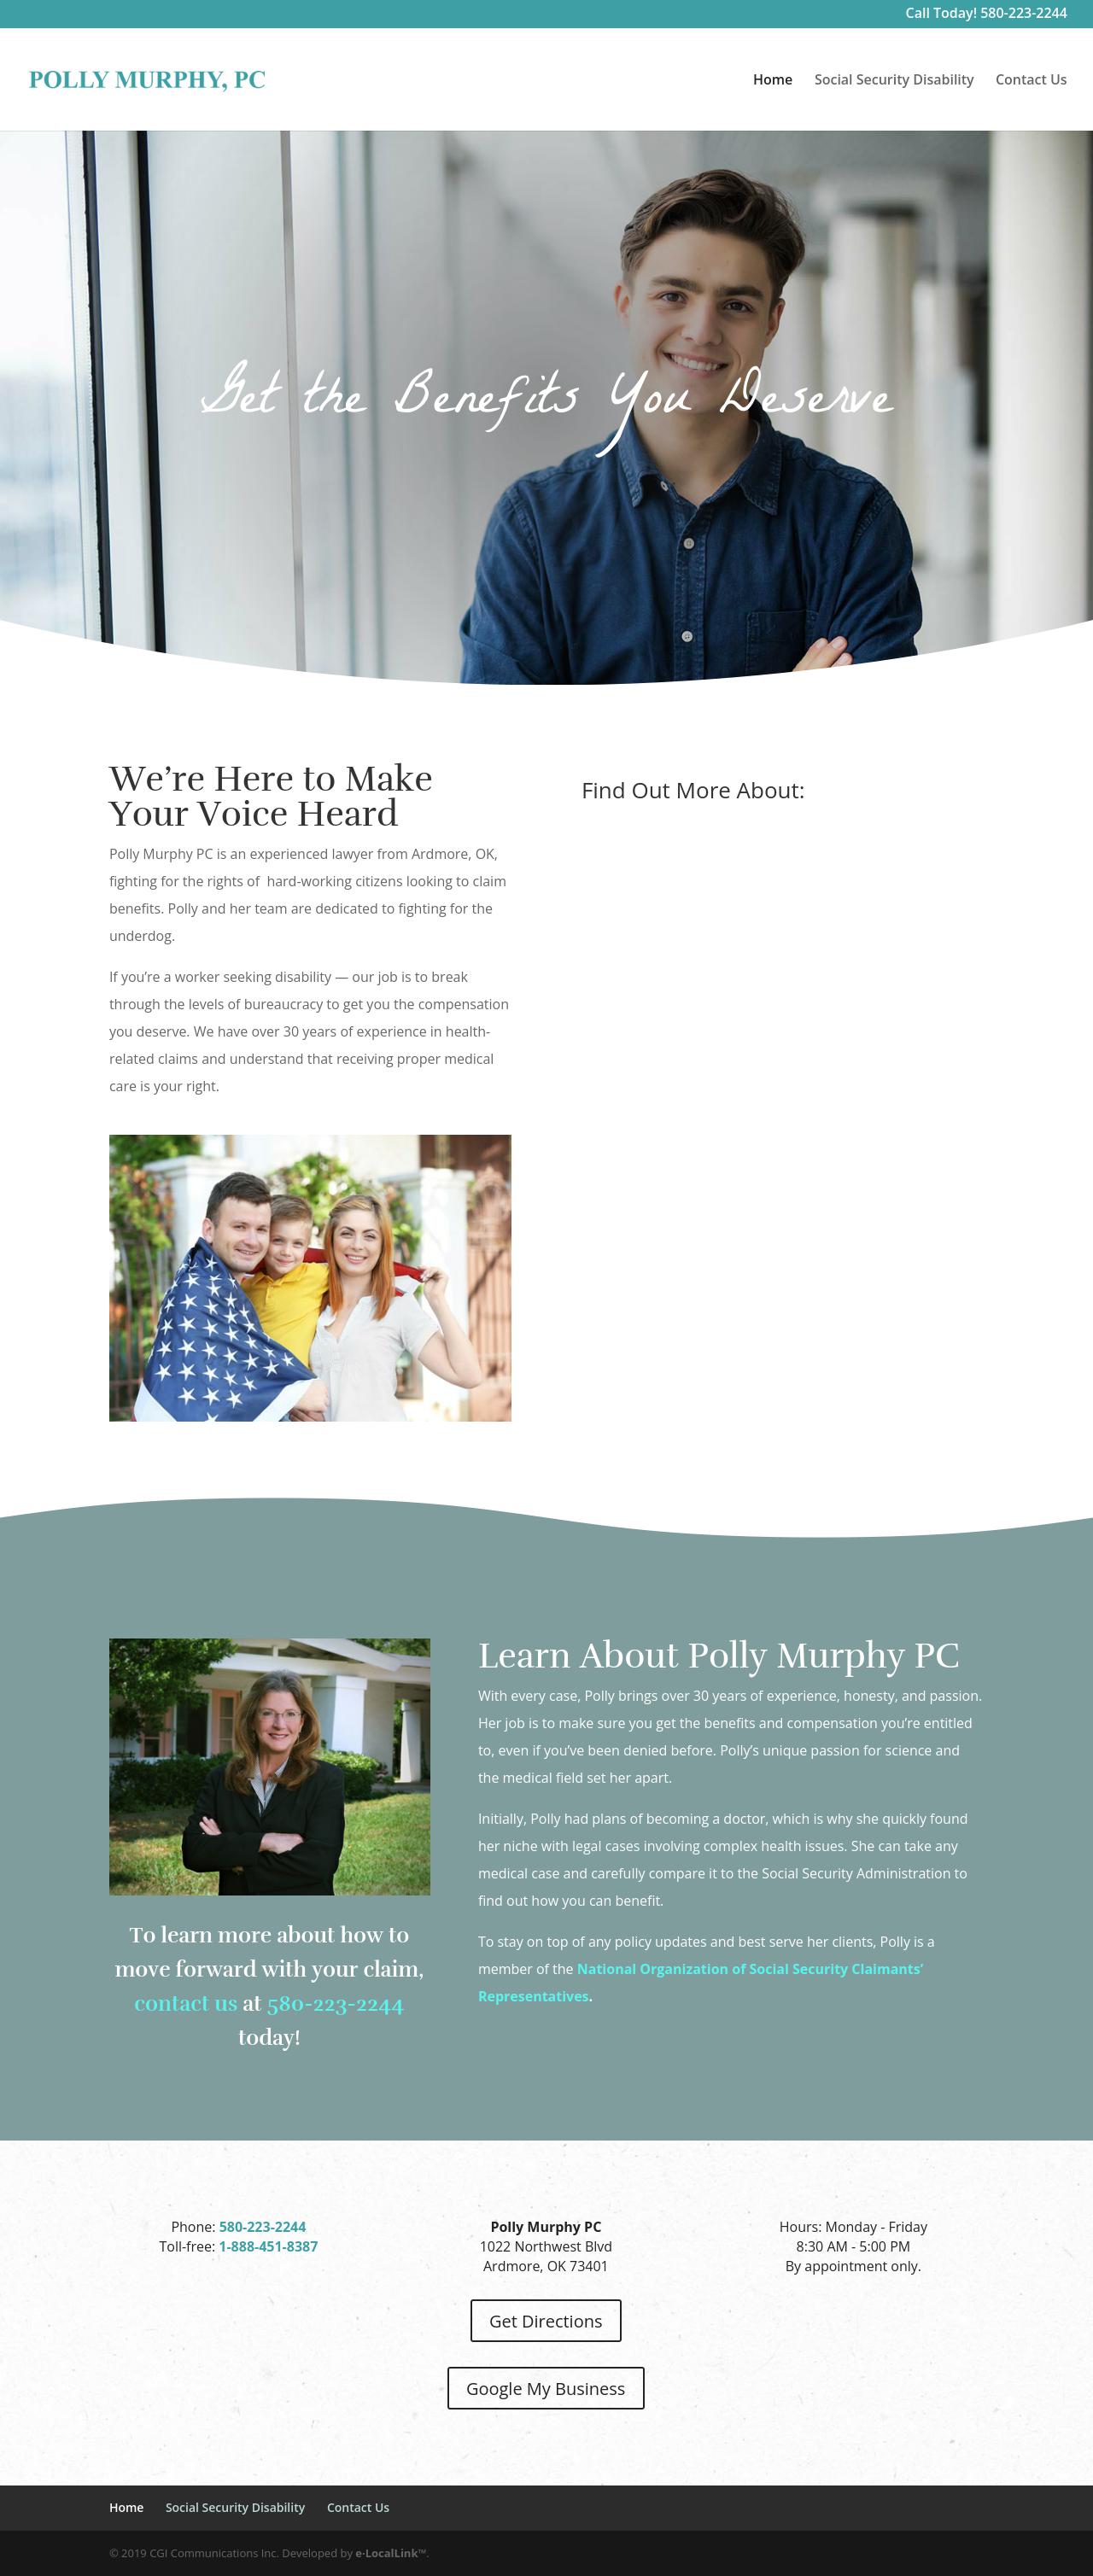 Polly Murphy, PC - Ardmore OK Lawyers